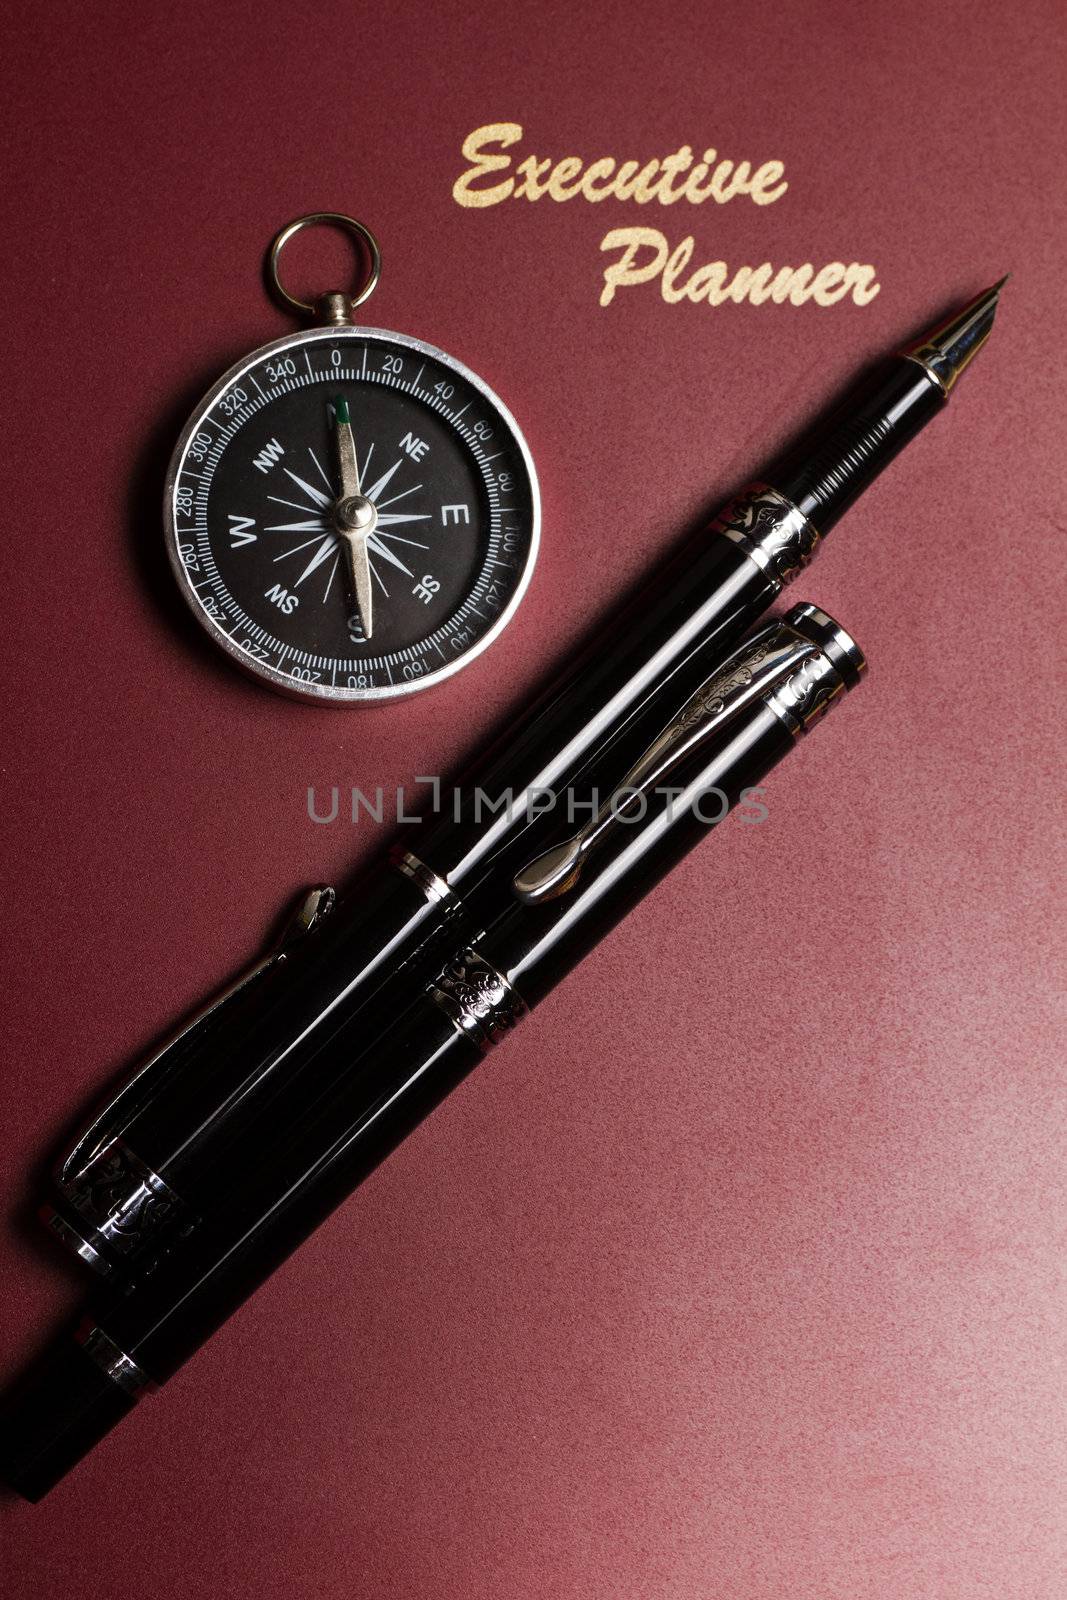 a dark red executive planner with a simple compass and two pens in portrait orientation